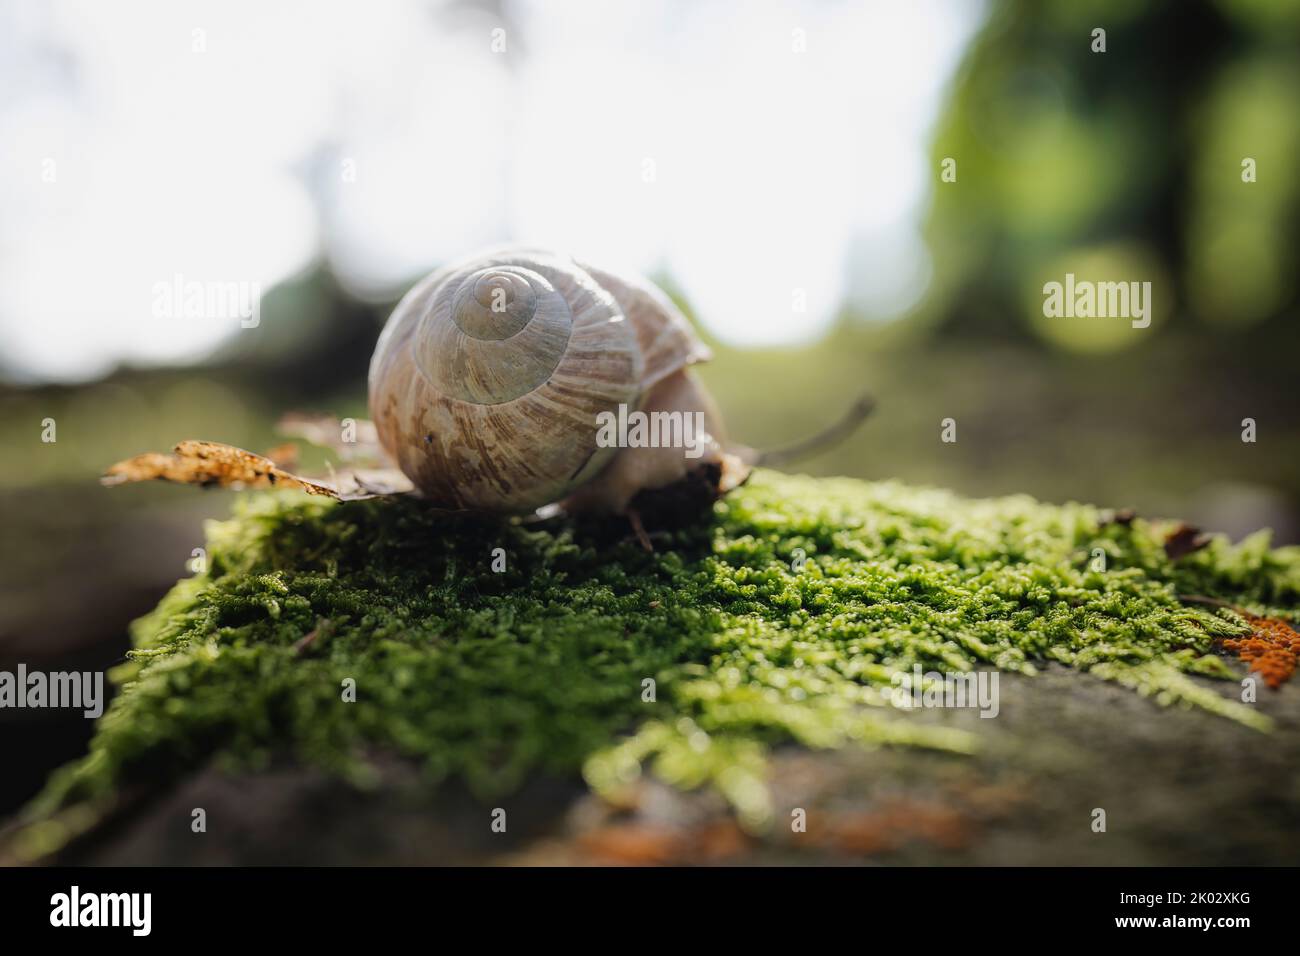 Snail in moss Stock Photo